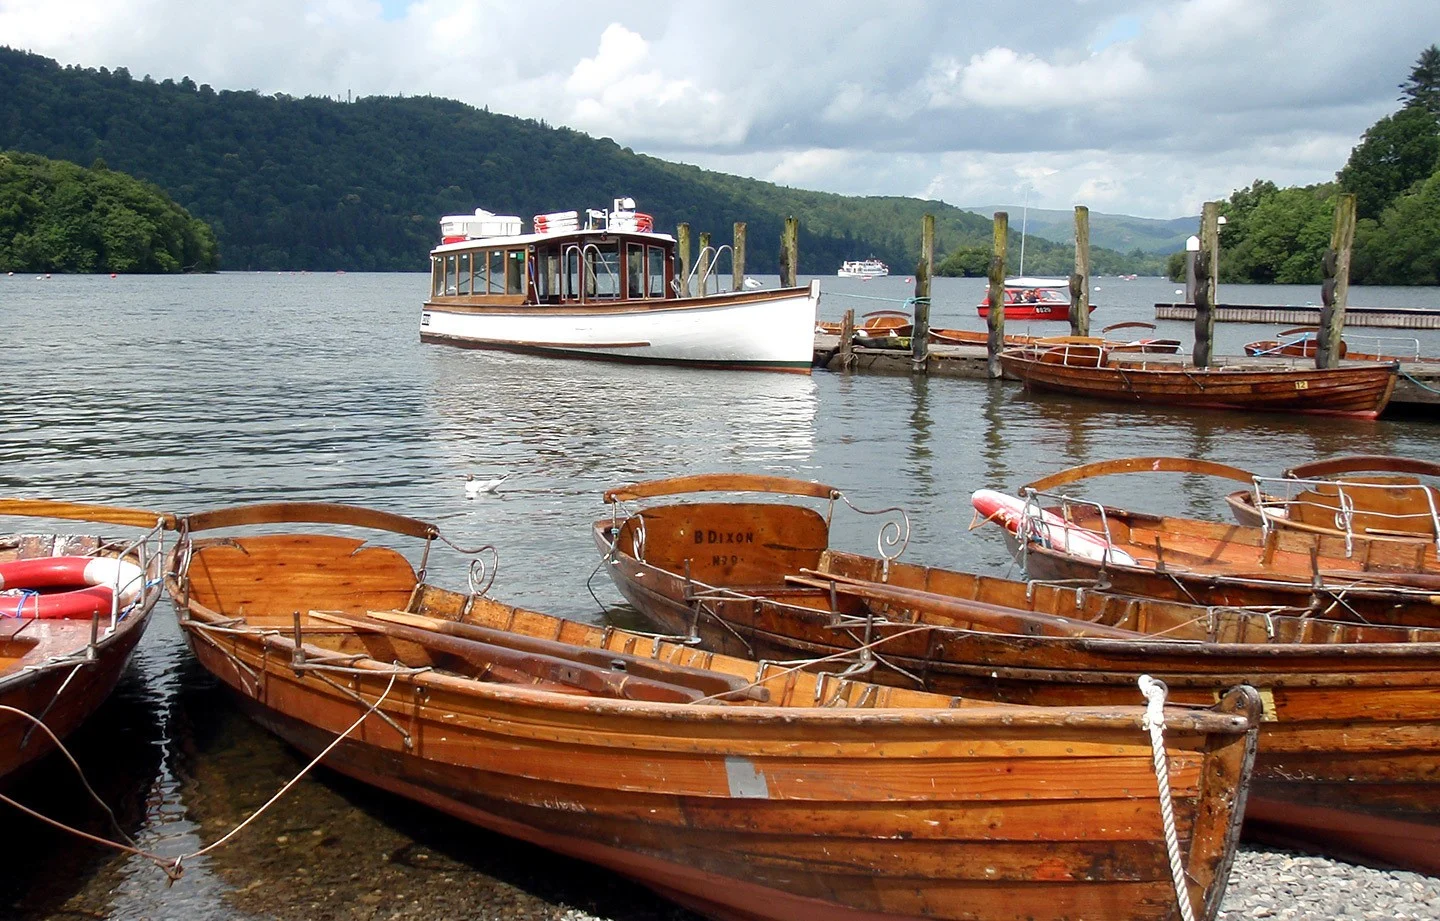 Boats on Lake Windermere in the Lake District